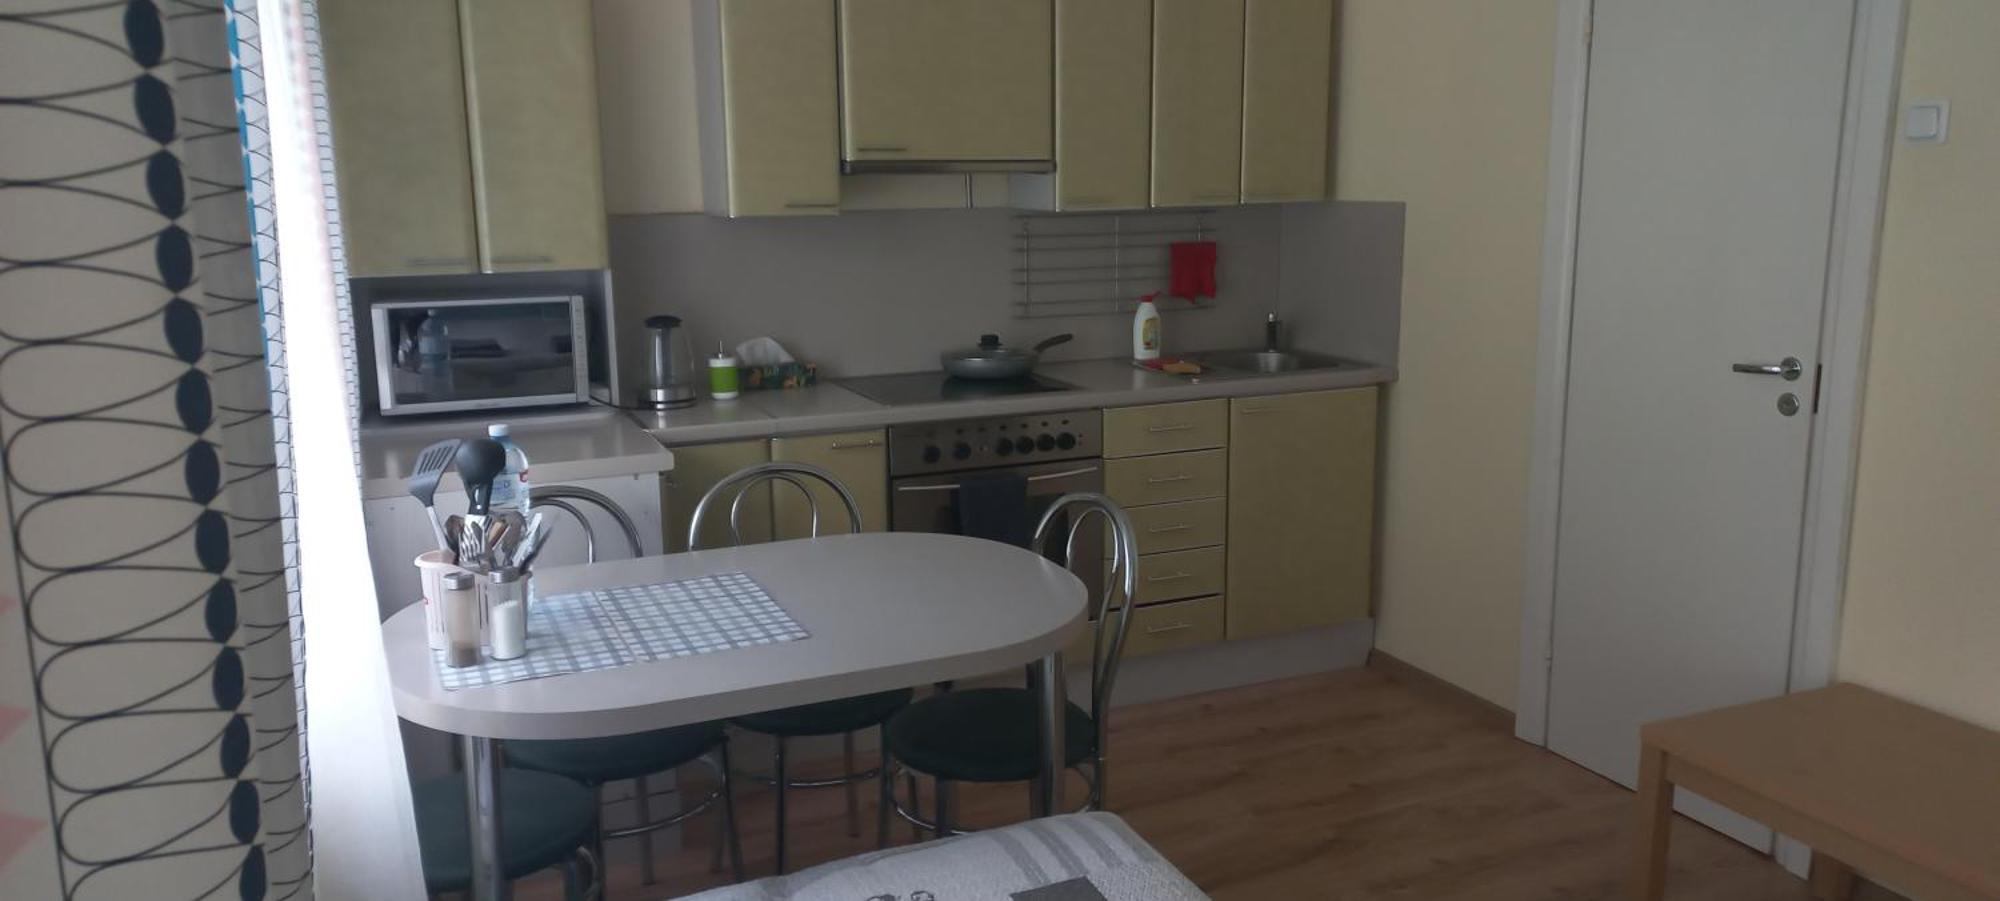 City Apartments Near Sea - The Kitchen Is Updated! 塔林 外观 照片